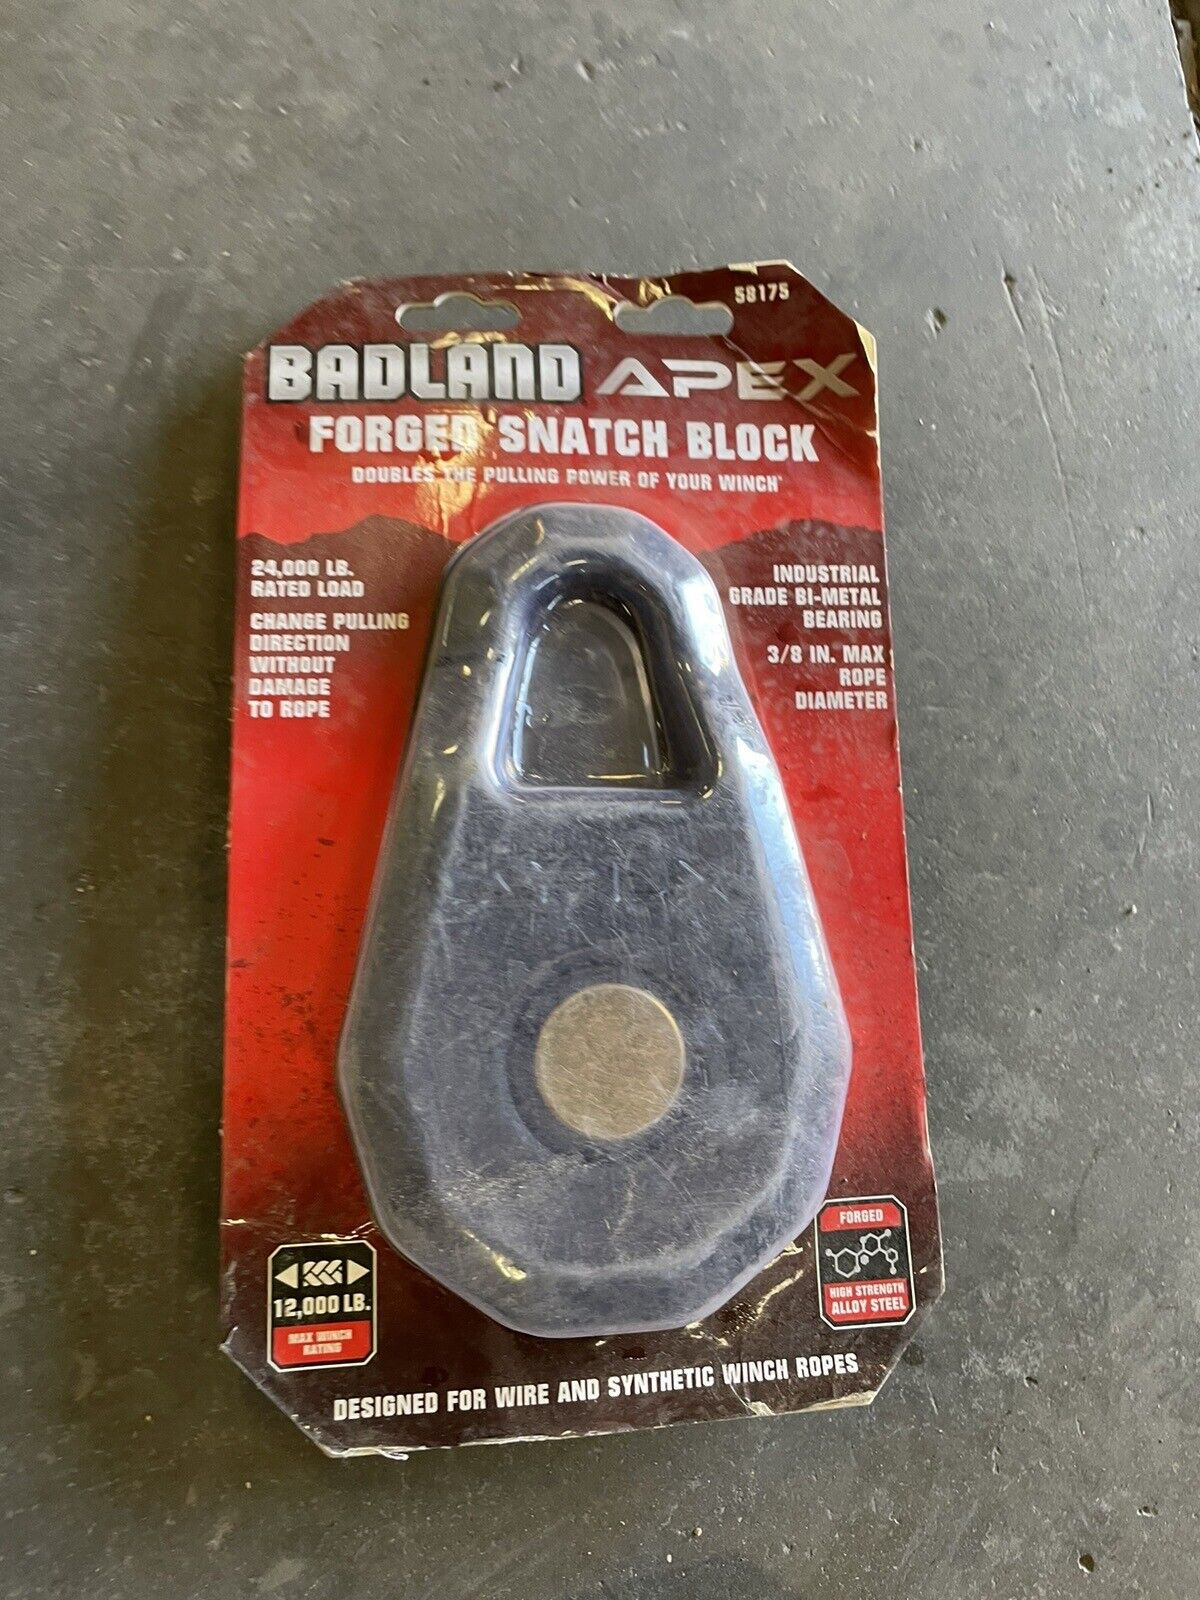 Badland Apex Forged Snatch Block Rated For 24000 Lbs